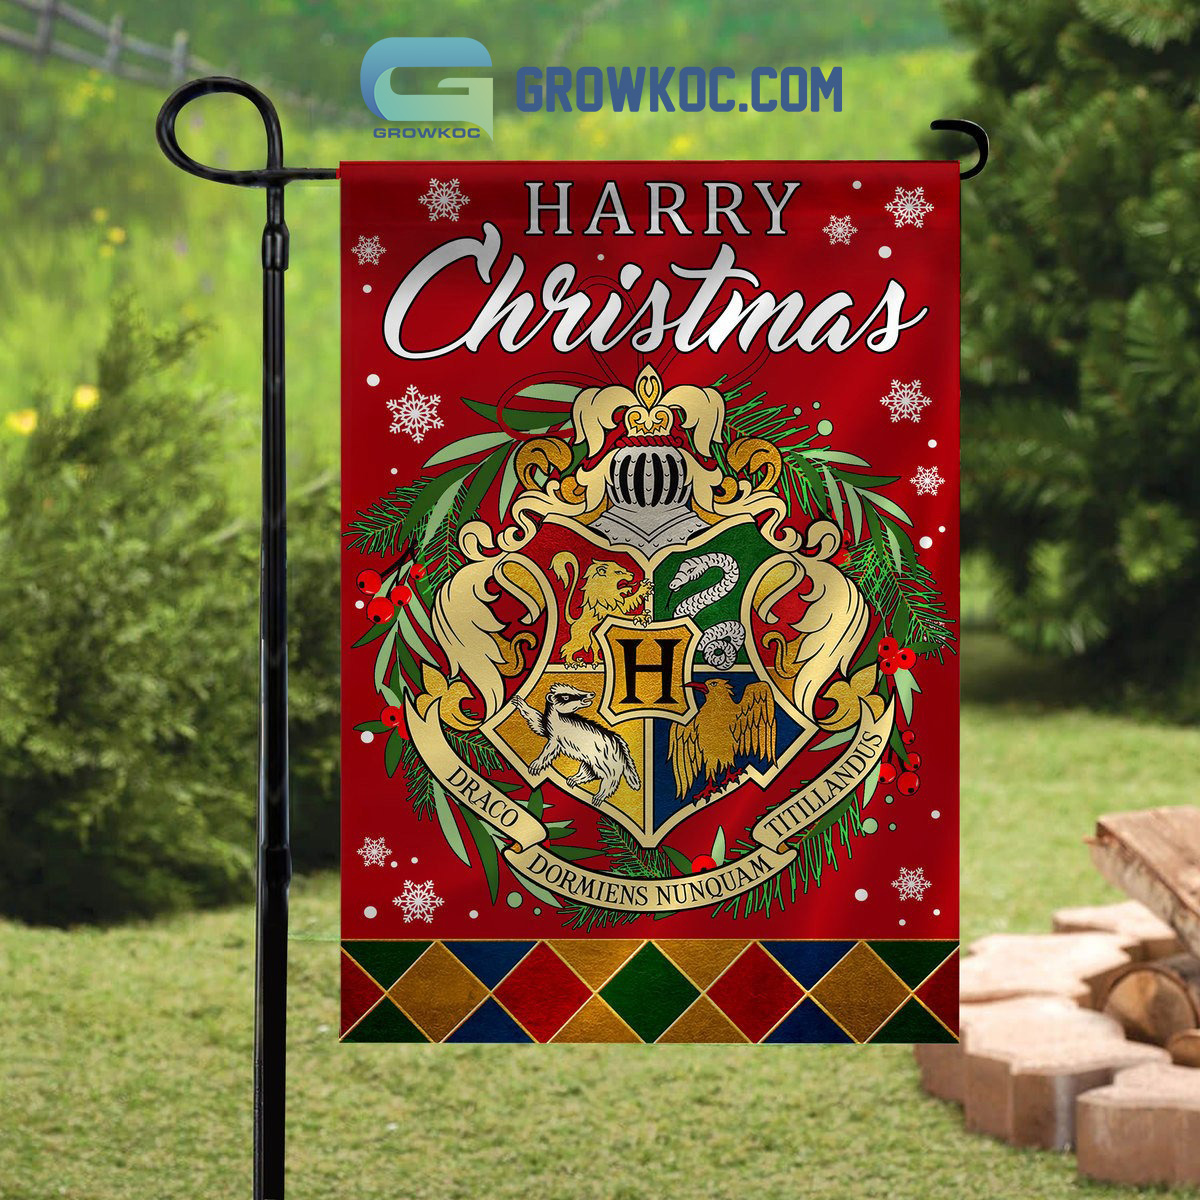 Hogwarts 50 x 30 House Banners - Harry Potter Polyester Flags